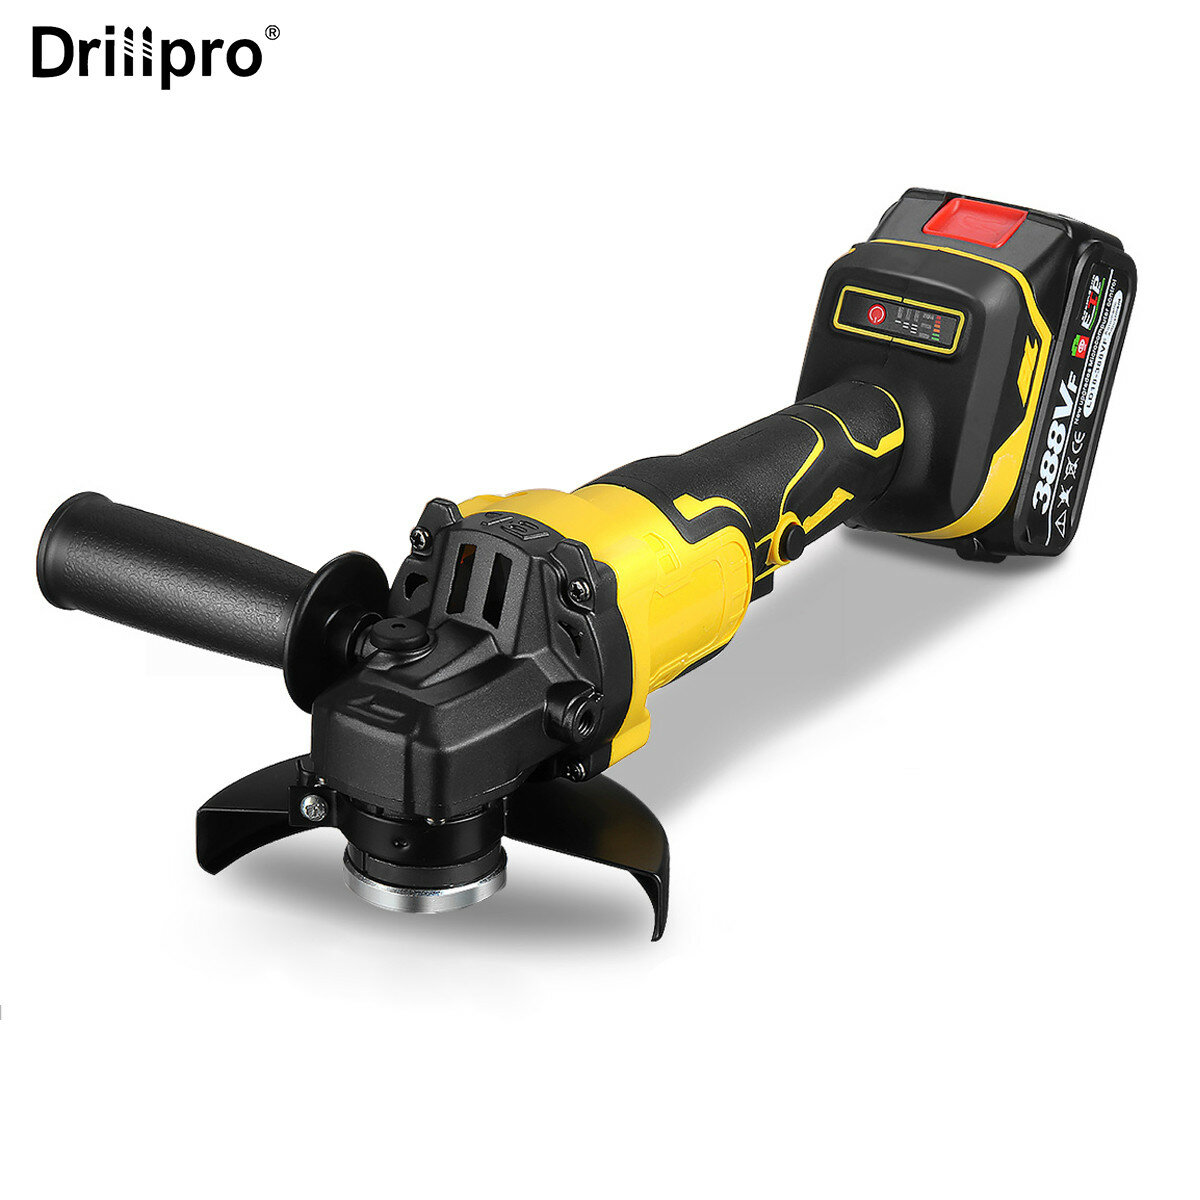 Image of Drillpro 388VF 1280W 8500rpm 3 gears 125mm Brushless Lithium Electric Angle Grinder for Makiita 18V Battery